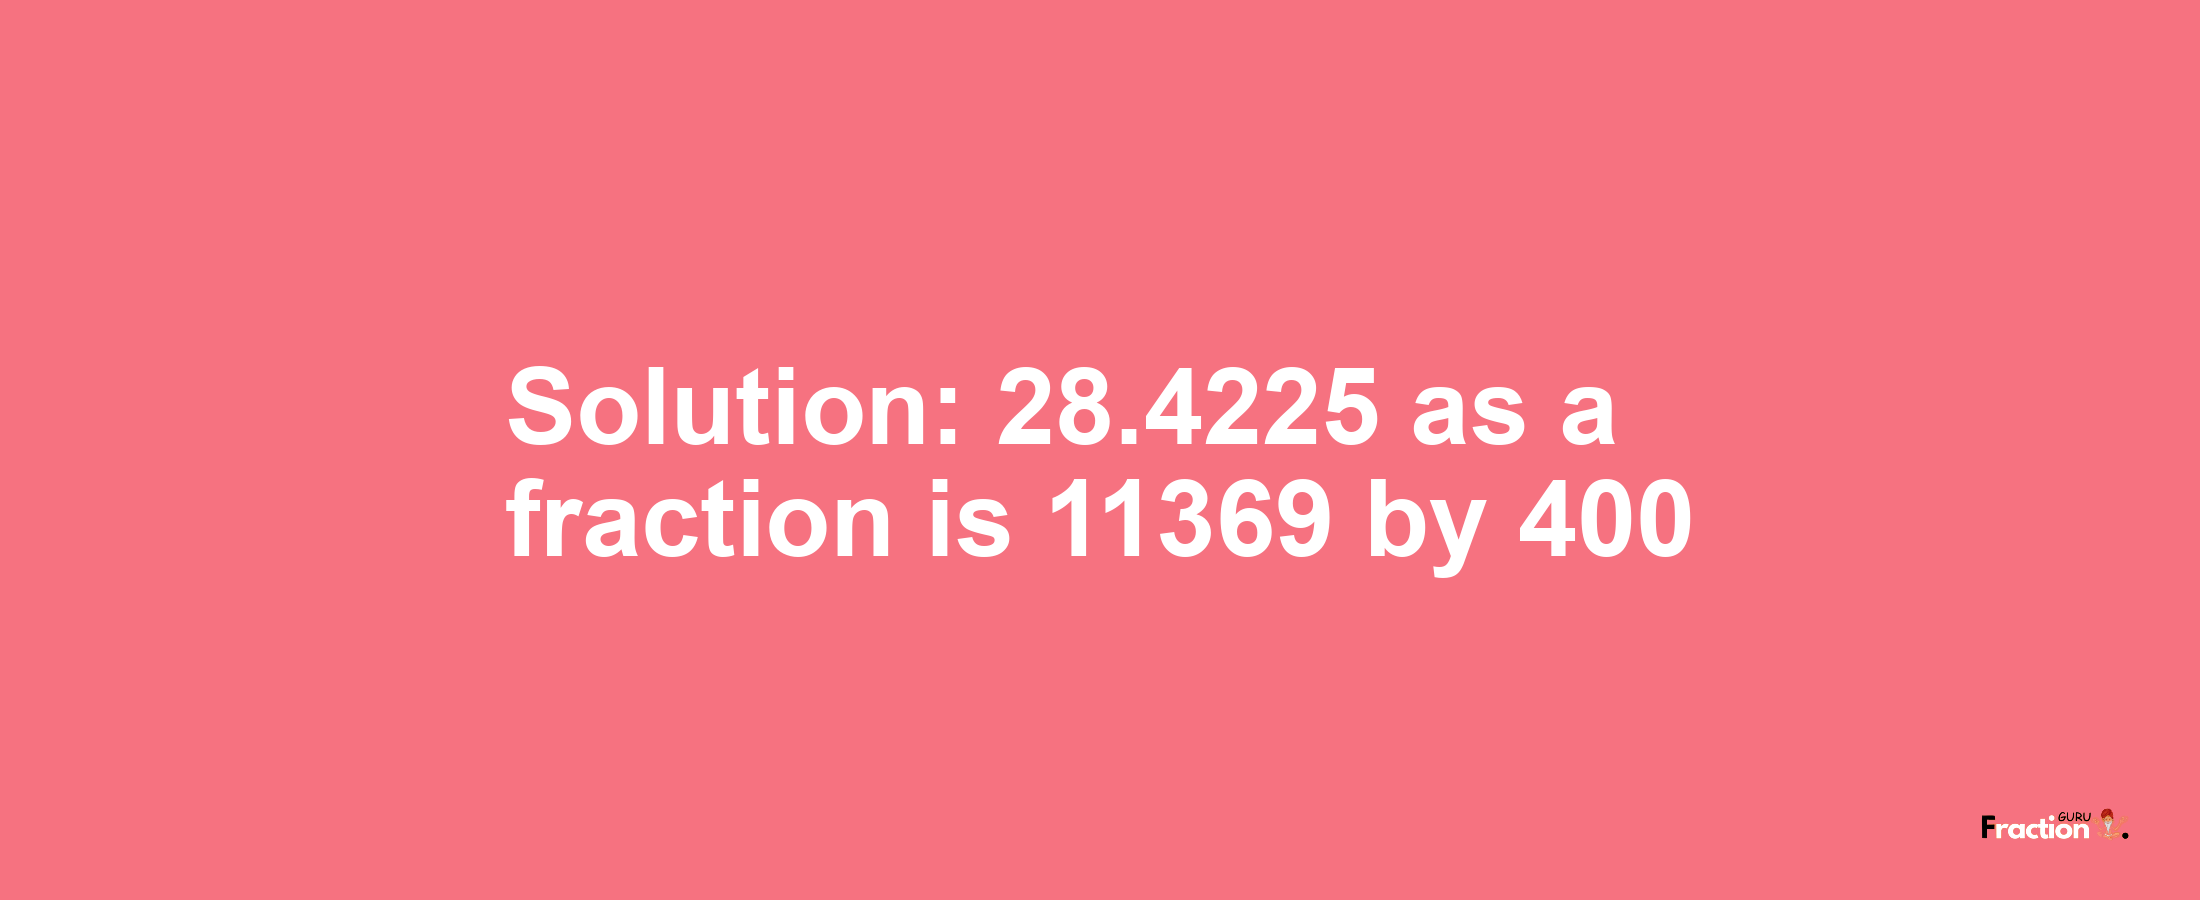 Solution:28.4225 as a fraction is 11369/400